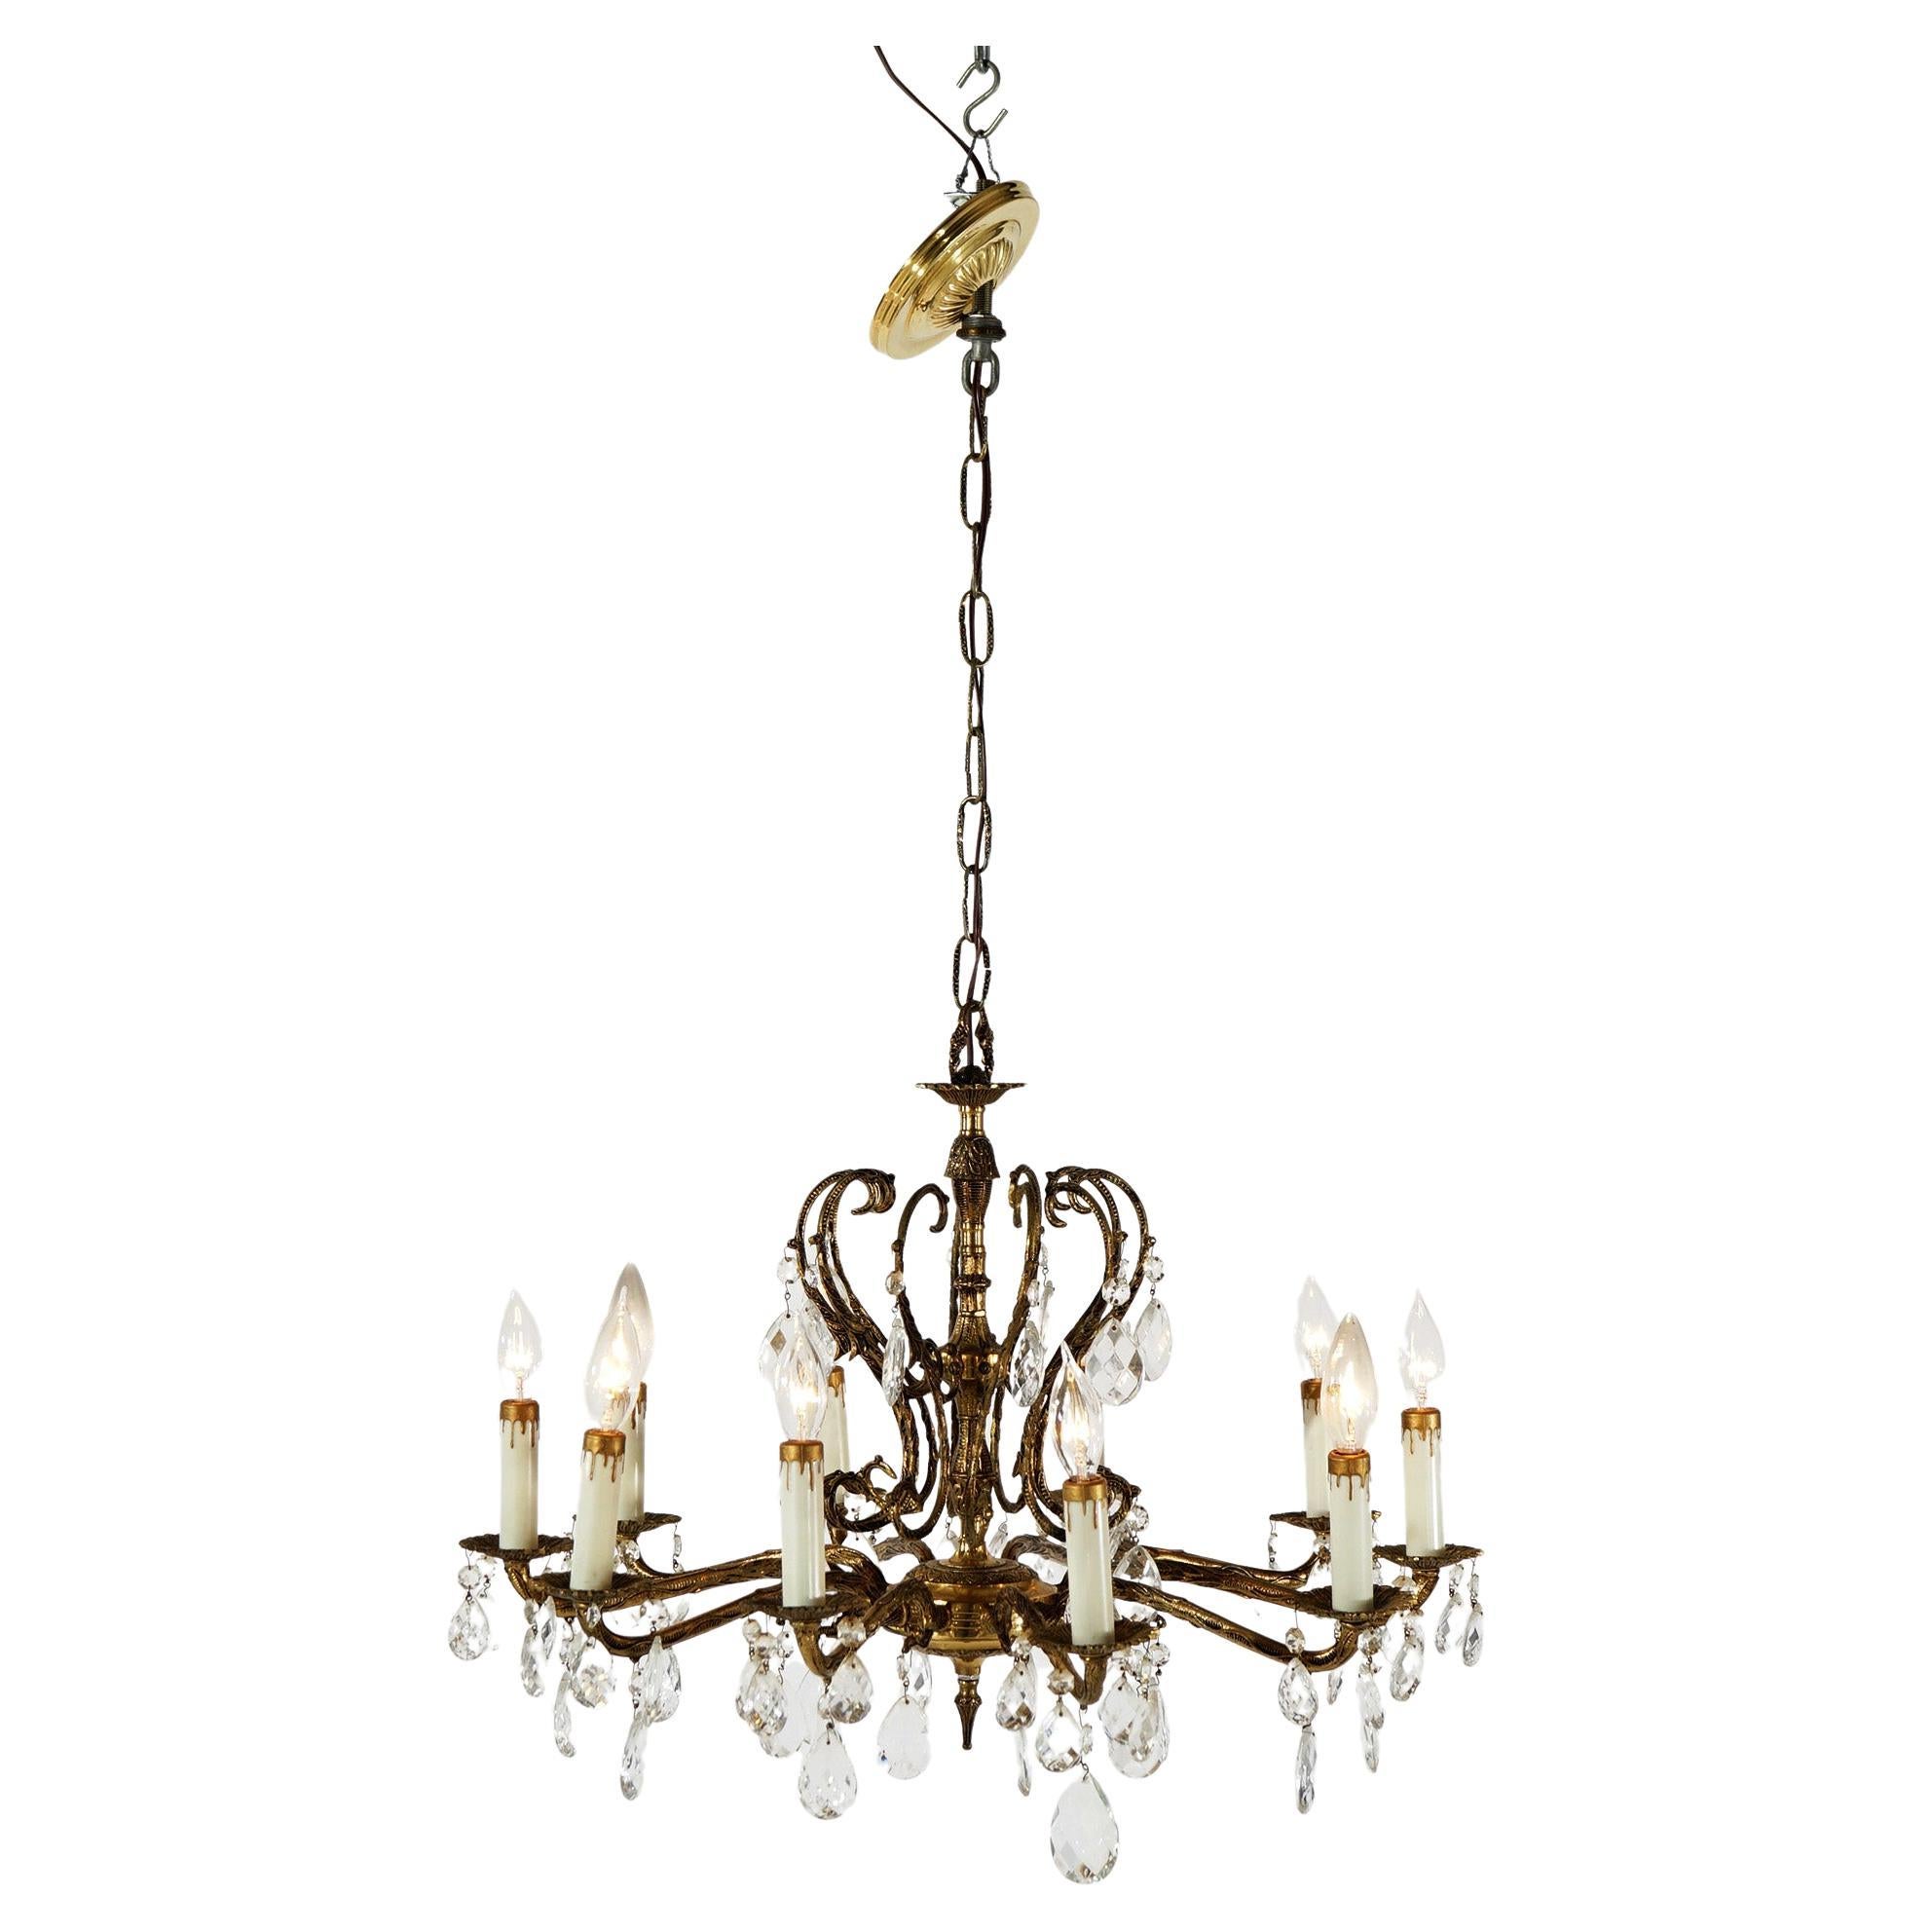 French Style Bronzed Metal & Crystal Ten Light Chandelier, circa 1940